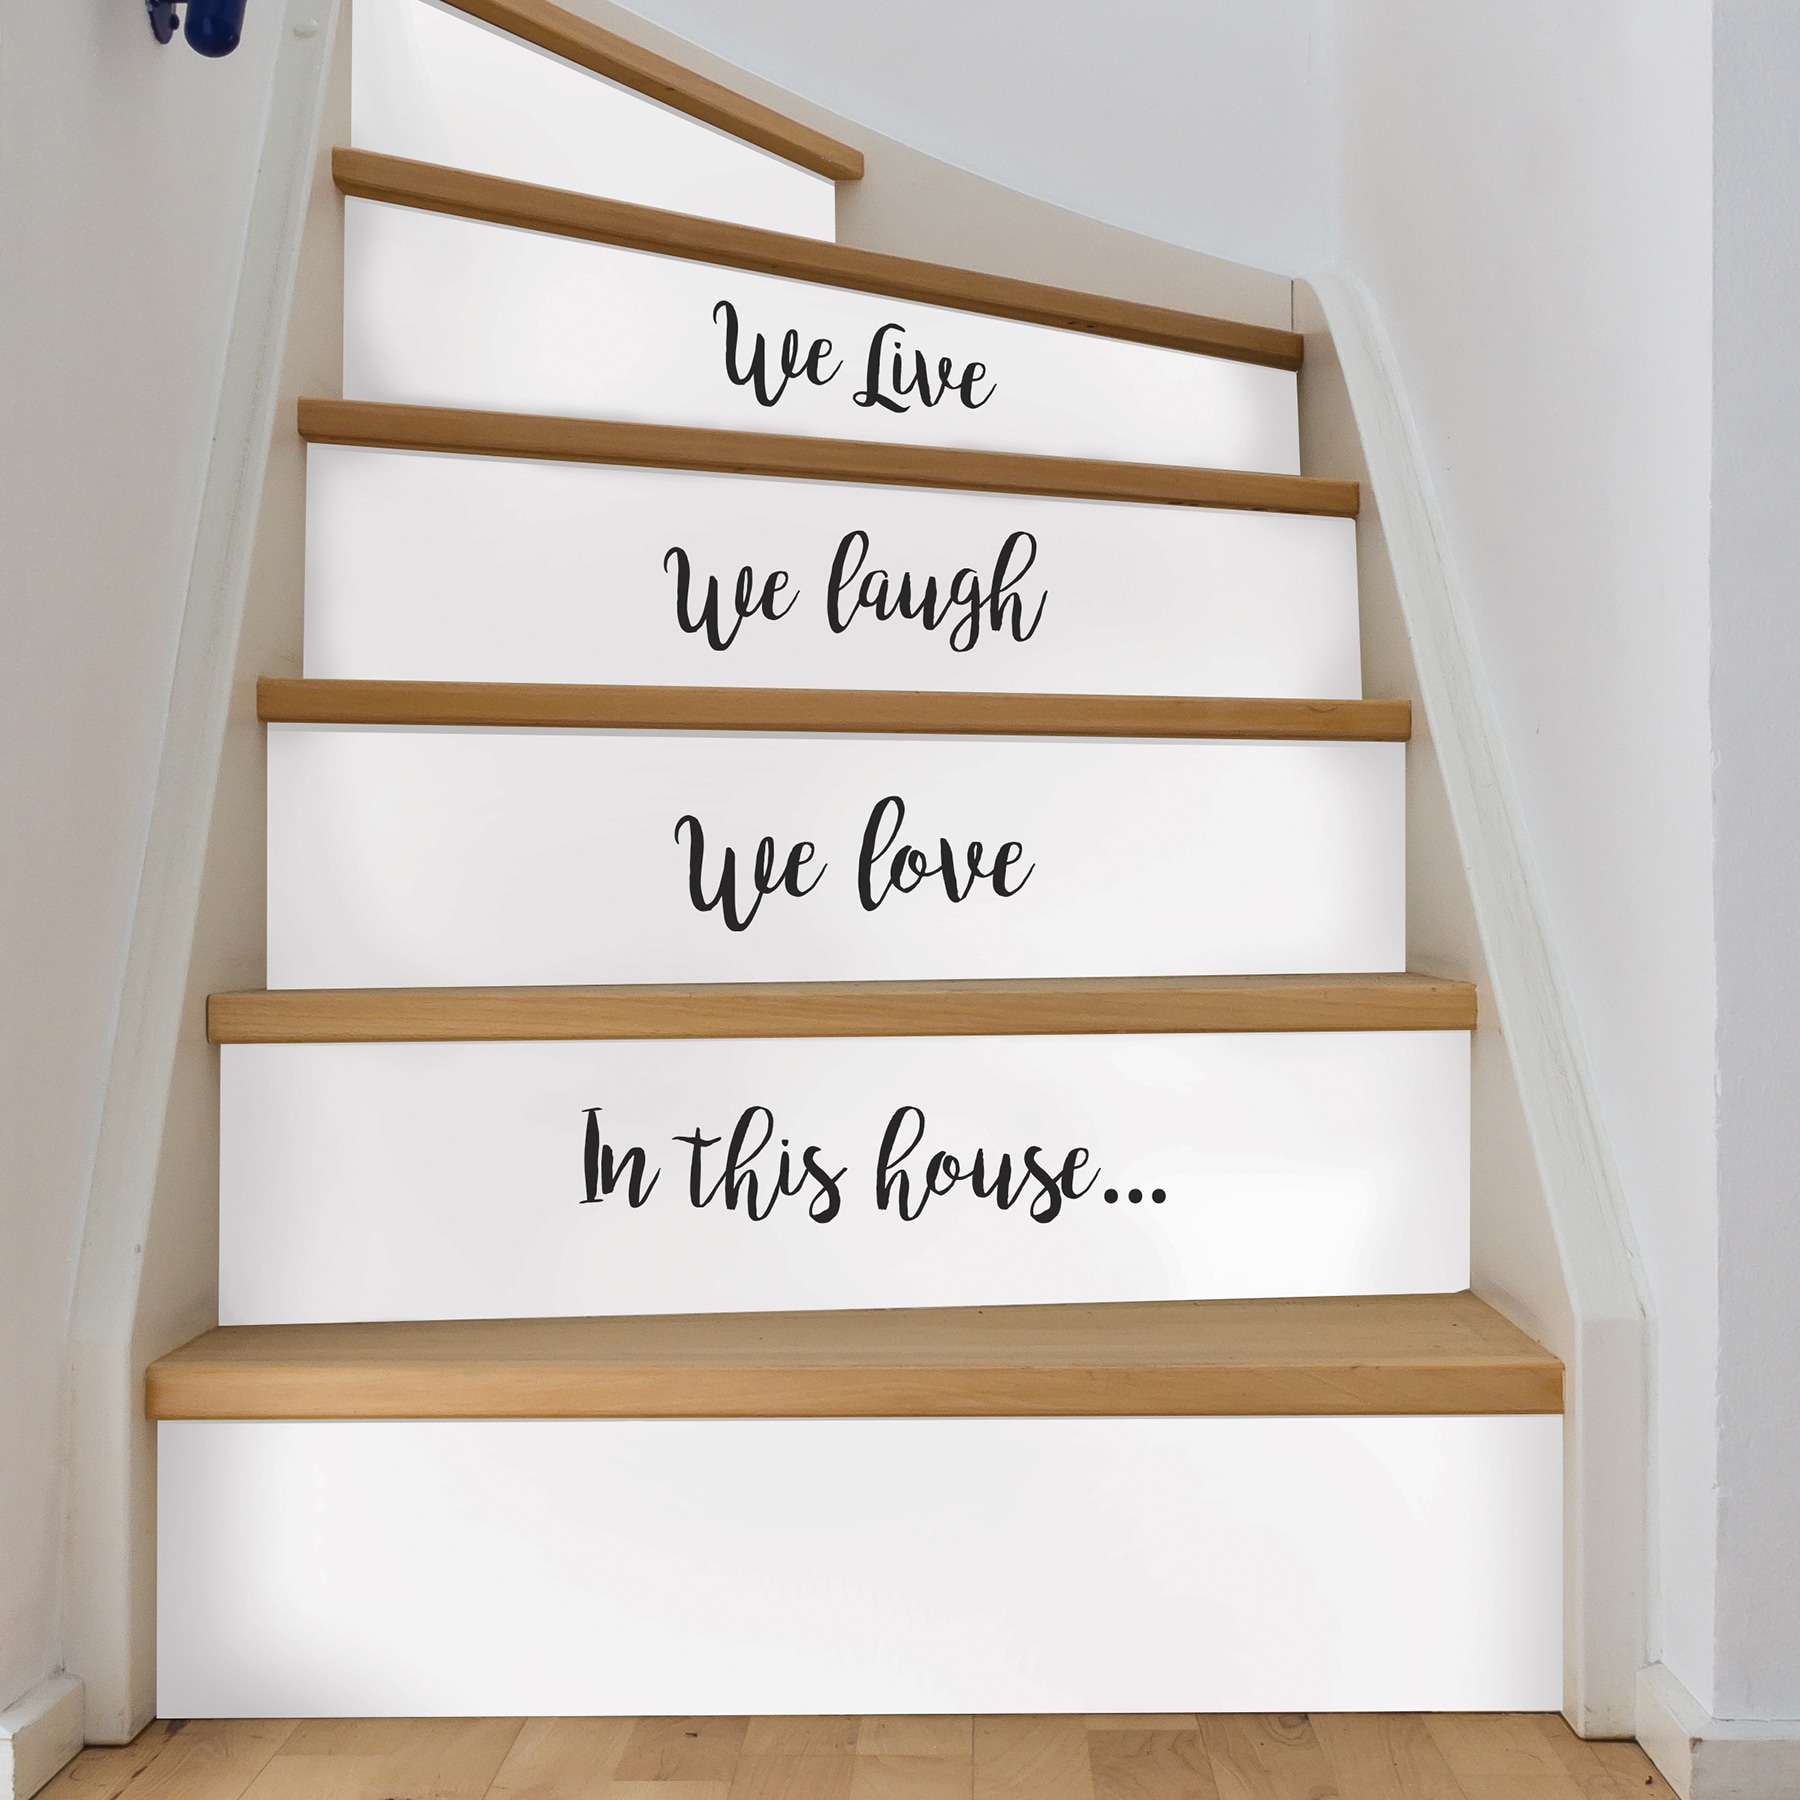 Vinyl Wall Decal Sticker Love Light #1324 -- I love this one, too